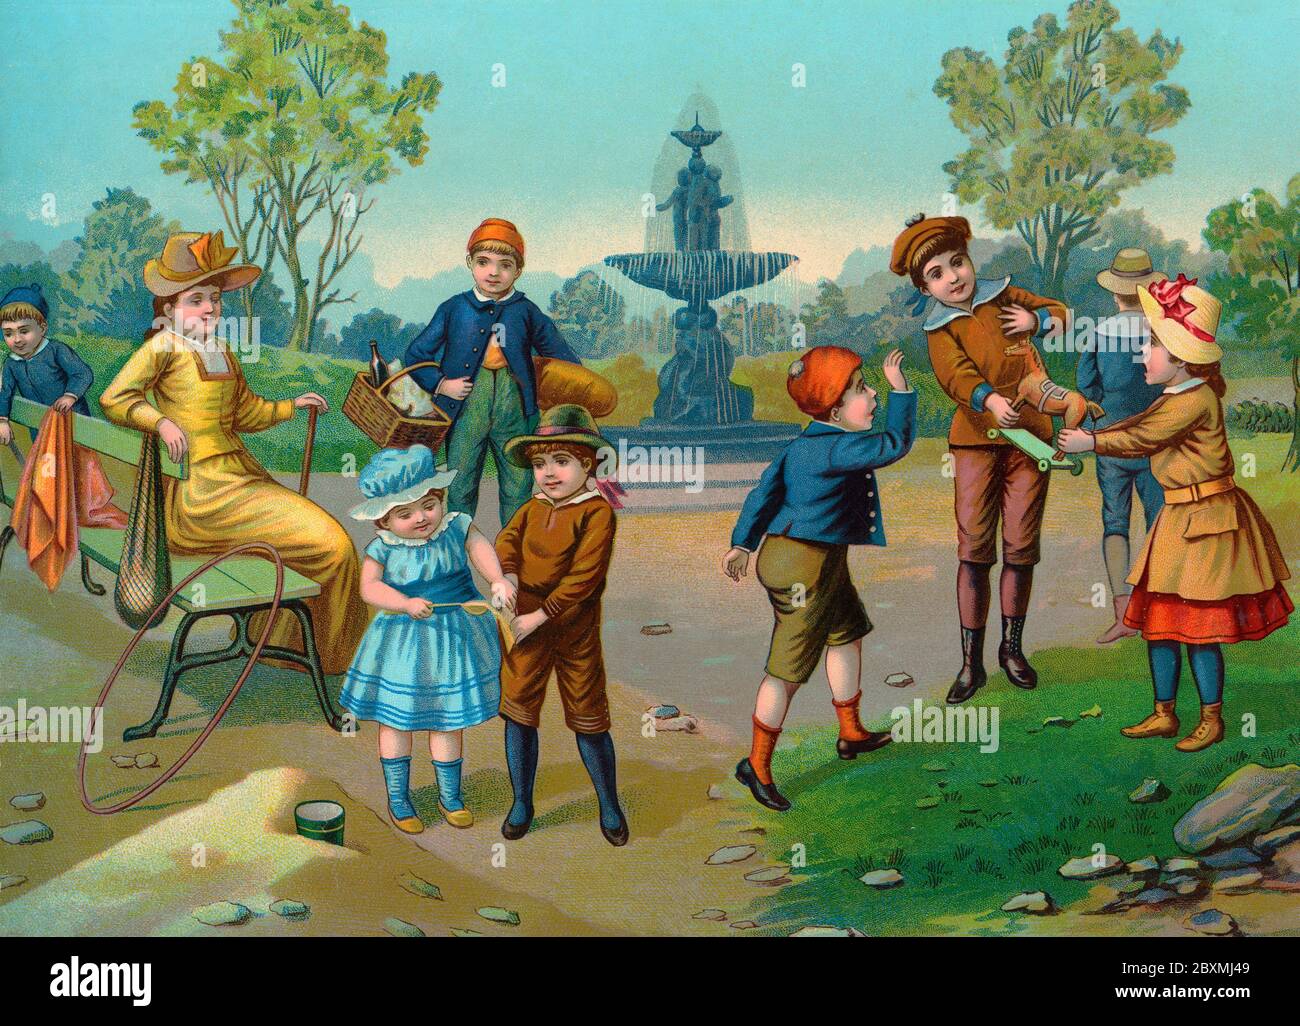 Old illustration. On this British 19th century illustration children are playing outdoors with typical toys of the time. A happy summer scene. Stock Photo